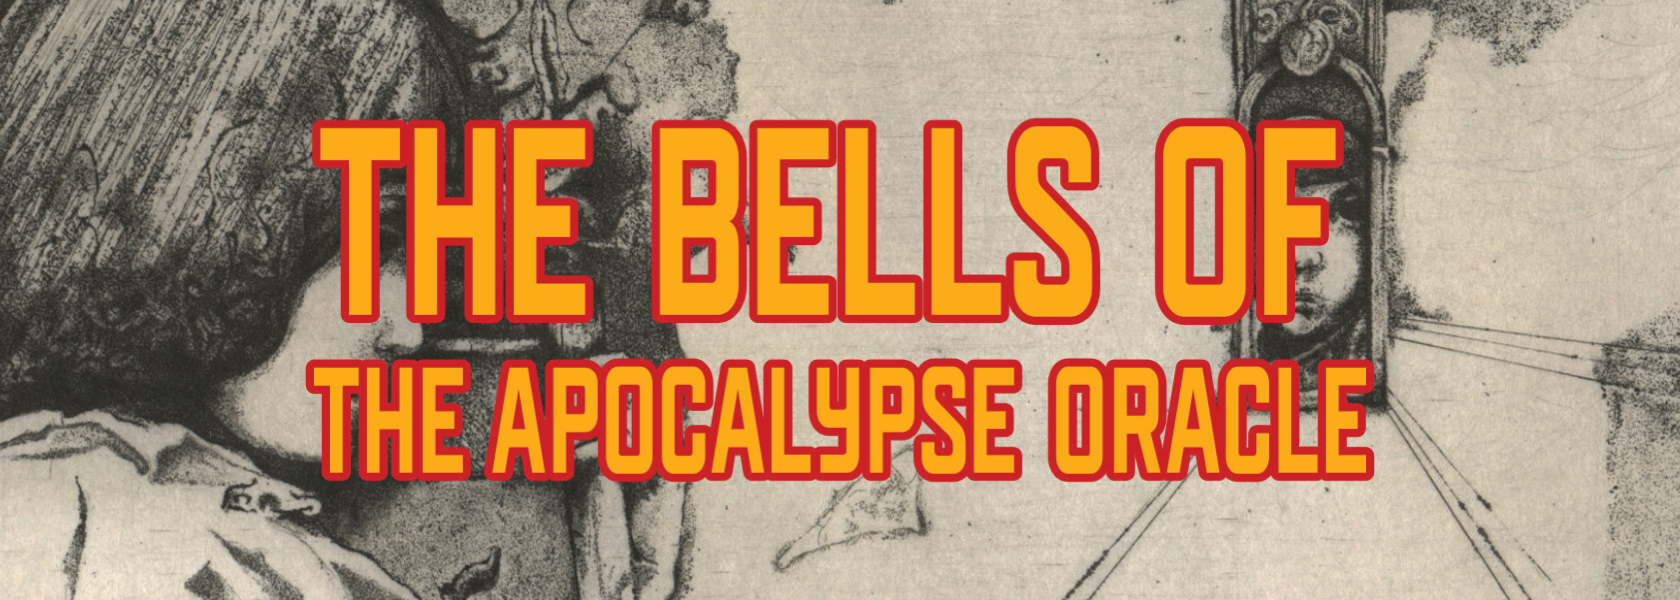 The Bells of Apocalipse Oracle